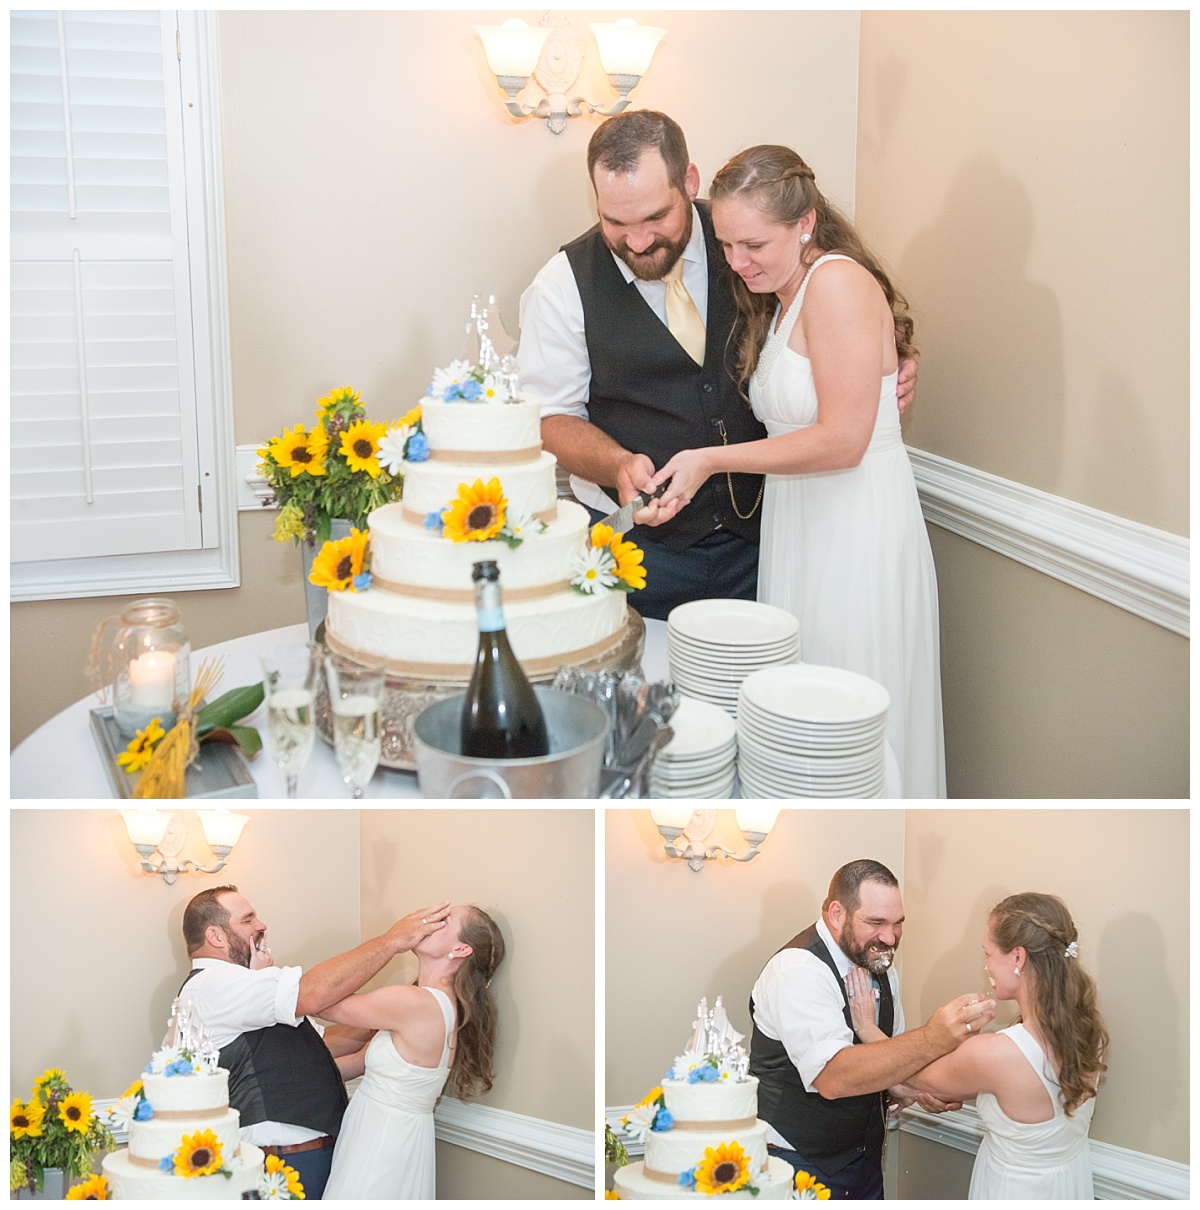 Cake cutting at the corley mill house